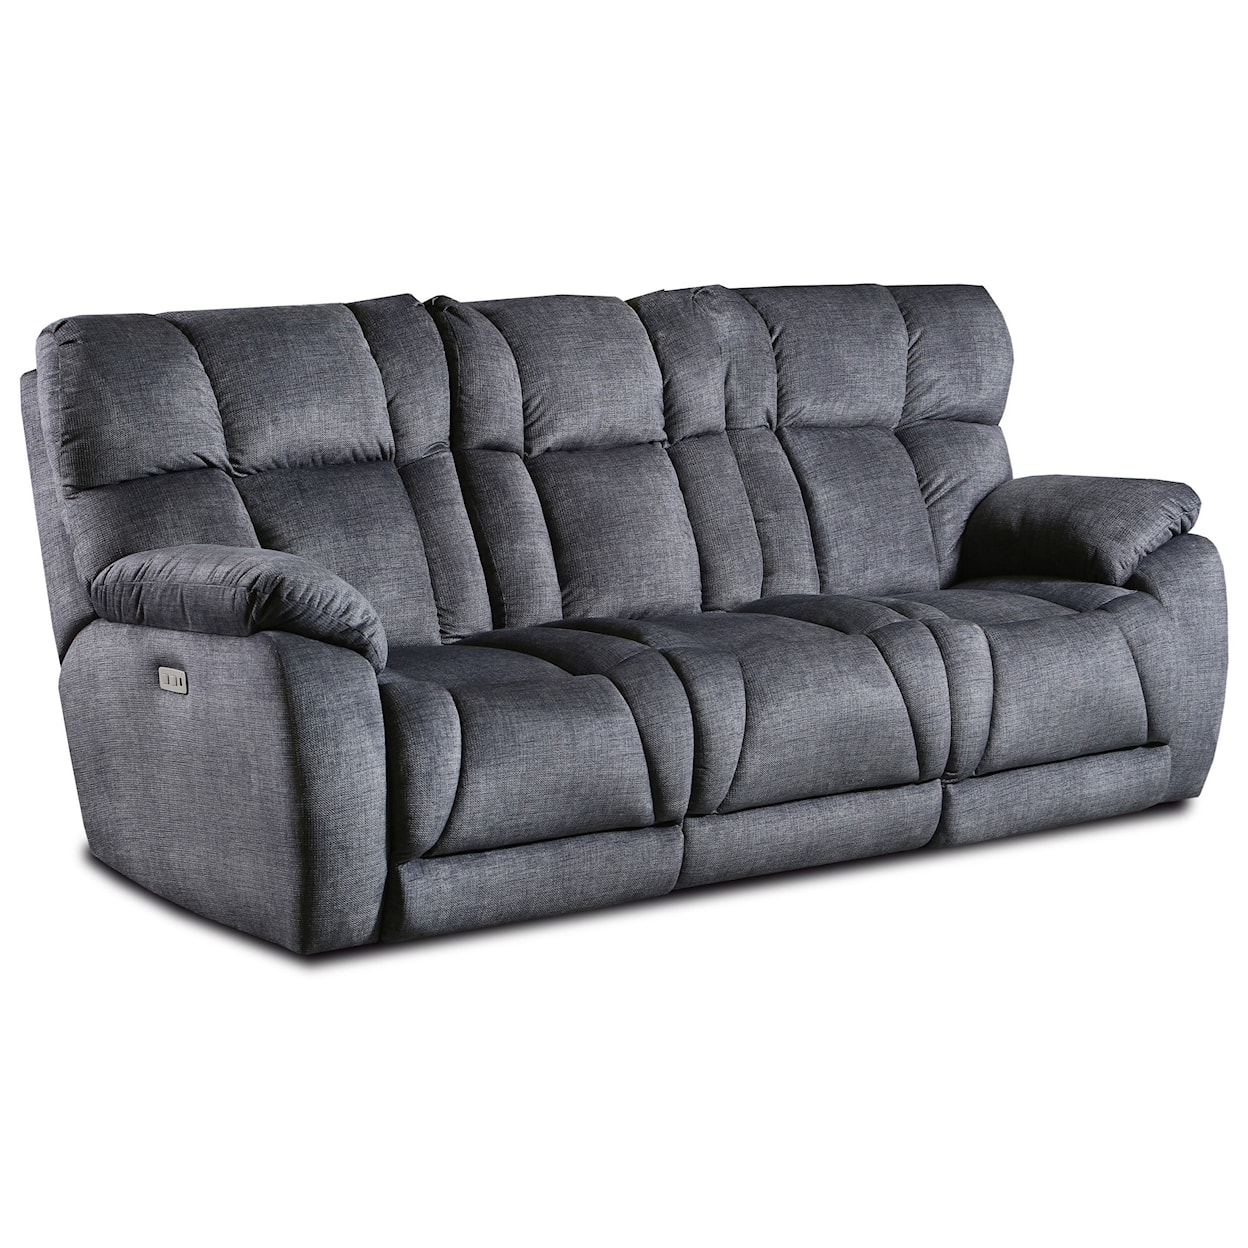 Powell's Motion Wild Card Pwr Hdrest Dble Reclining Sofa With Next Lev